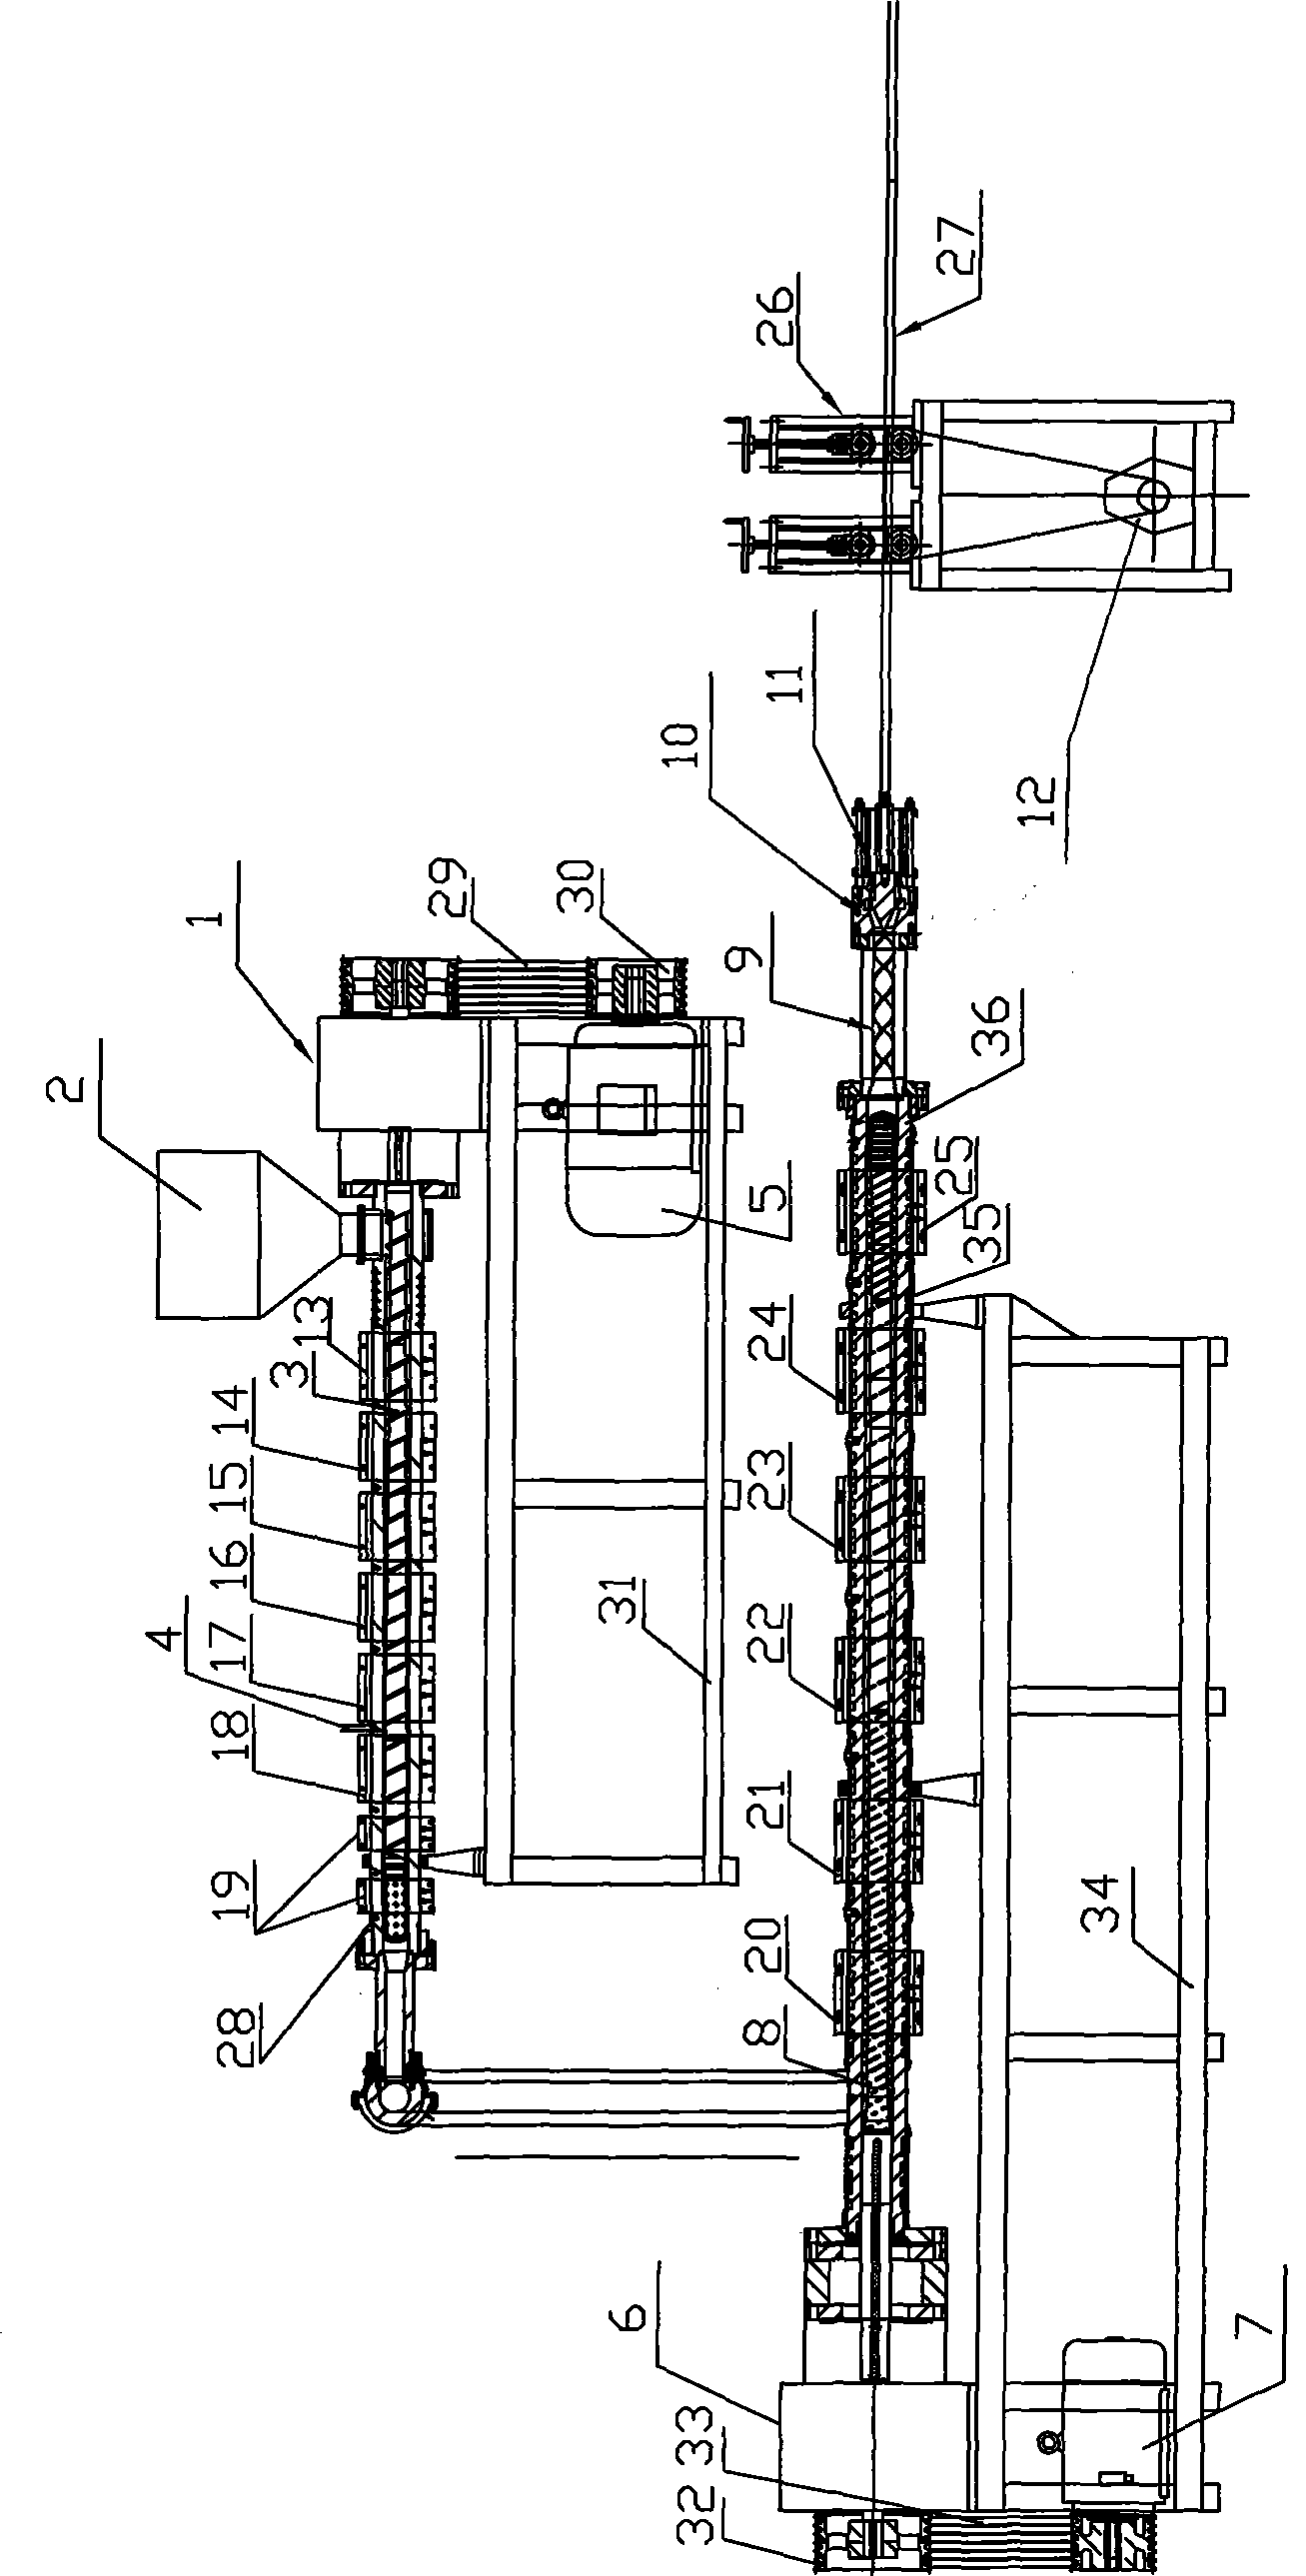 Equipment and method for producing polystyrene extruded plastic foam insulated pipes